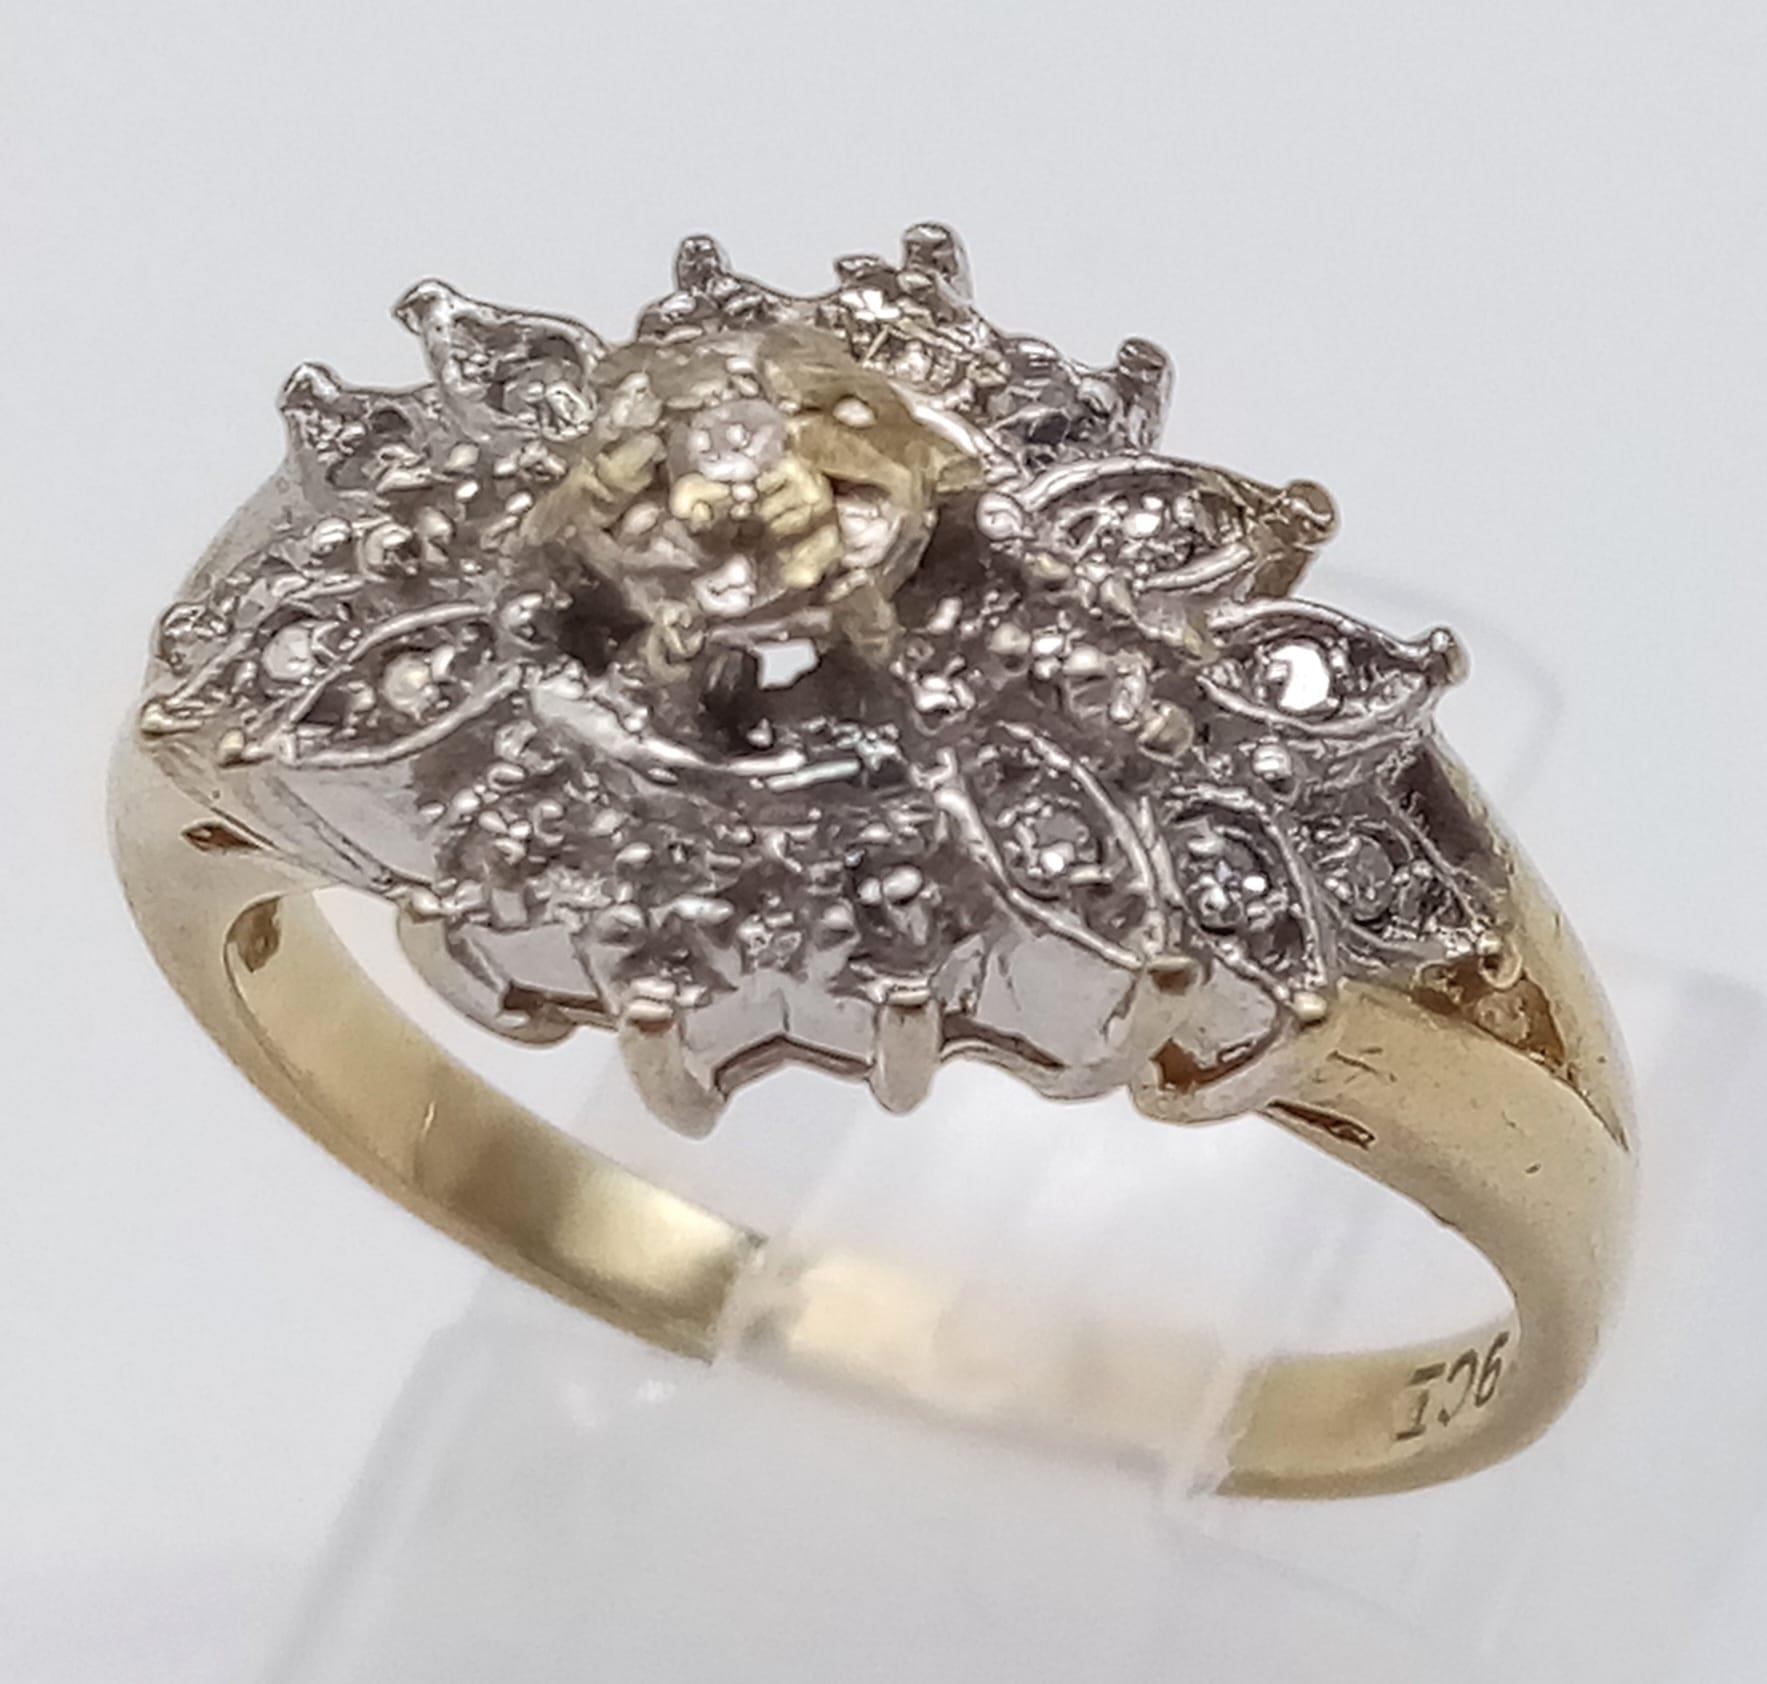 A 9K YELLOW GOLD DIAMOND CLUSTER RING IN THE FLORAL DECORATIVE SETTING 0.20CT 1.5G SIZE I